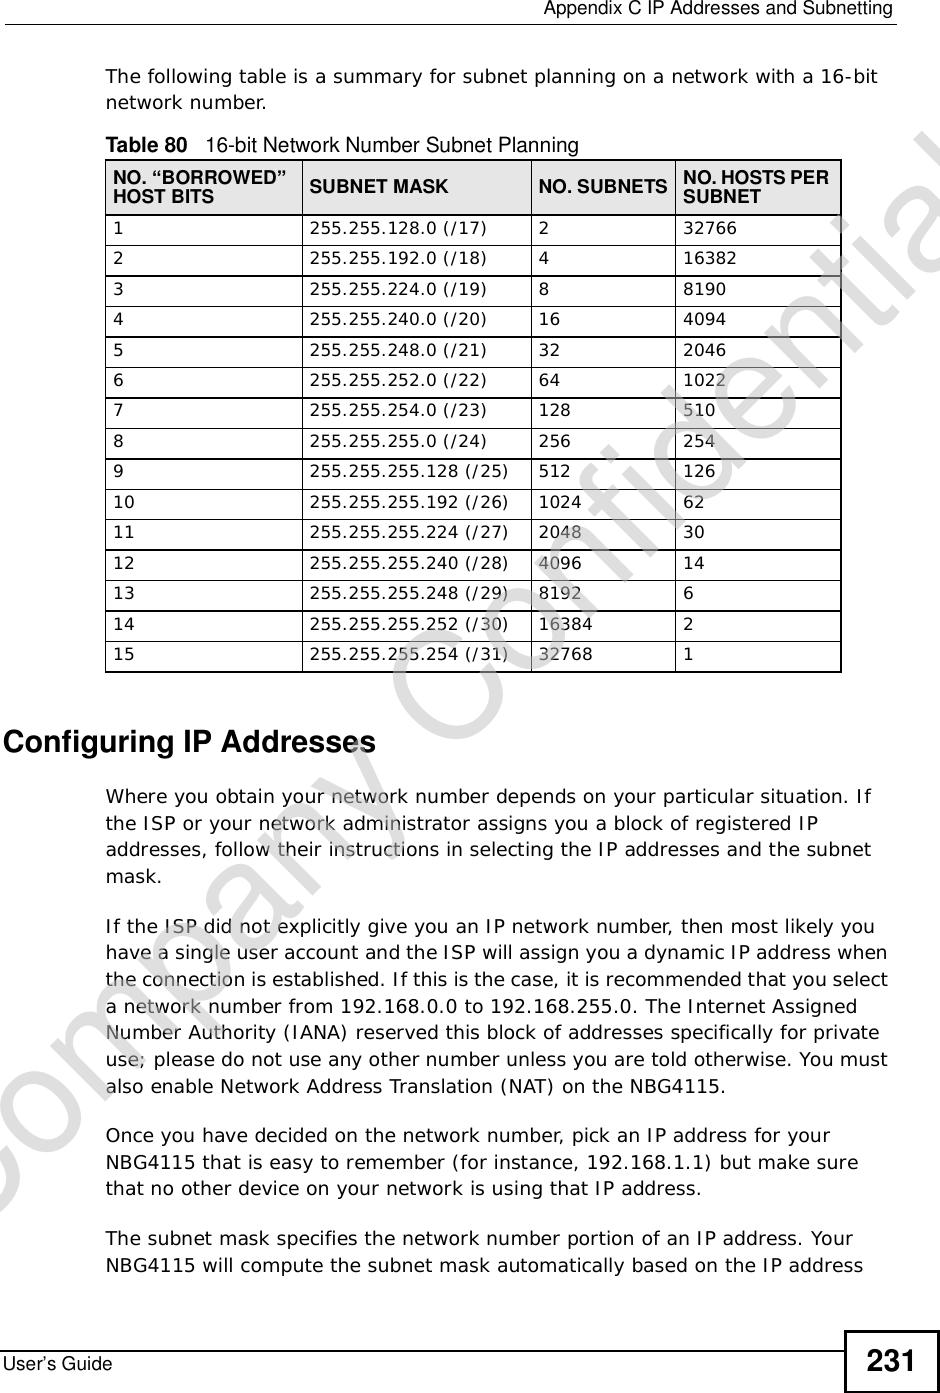  Appendix CIP Addresses and SubnettingUser’s Guide 231The following table is a summary for subnet planning on a network with a 16-bit network number. Configuring IP AddressesWhere you obtain your network number depends on your particular situation. If the ISP or your network administrator assigns you a block of registered IP addresses, follow their instructions in selecting the IP addresses and the subnet mask.If the ISP did not explicitly give you an IP network number, then most likely you have a single user account and the ISP will assign you a dynamic IP address when the connection is established. If this is the case, it is recommended that you select a network number from 192.168.0.0 to 192.168.255.0. The Internet Assigned Number Authority (IANA) reserved this block of addresses specifically for private use; please do not use any other number unless you are told otherwise. You must also enable Network Address Translation (NAT) on the NBG4115. Once you have decided on the network number, pick an IP address for your NBG4115 that is easy to remember (for instance, 192.168.1.1) but make sure that no other device on your network is using that IP address.The subnet mask specifies the network number portion of an IP address. Your NBG4115 will compute the subnet mask automatically based on the IP address Table 80   16-bit Network Number Subnet PlanningNO. “BORROWED” HOST BITS SUBNET MASK NO. SUBNETS NO. HOSTS PER SUBNET1255.255.128.0 (/17) 2 327662 255.255.192.0 (/18) 4 163823 255.255.224.0 (/19) 8 81904255.255.240.0 (/20) 16 40945255.255.248.0 (/21) 32 20466255.255.252.0 (/22) 64 10227255.255.254.0 (/23) 128 5108 255.255.255.0 (/24) 256 2549 255.255.255.128 (/25) 512 12610 255.255.255.192 (/26) 1024 6211 255.255.255.224 (/27) 2048 3012 255.255.255.240 (/28) 4096 1413 255.255.255.248 (/29) 8192 614 255.255.255.252 (/30) 16384 215 255.255.255.254 (/31) 32768 1Company Confidential